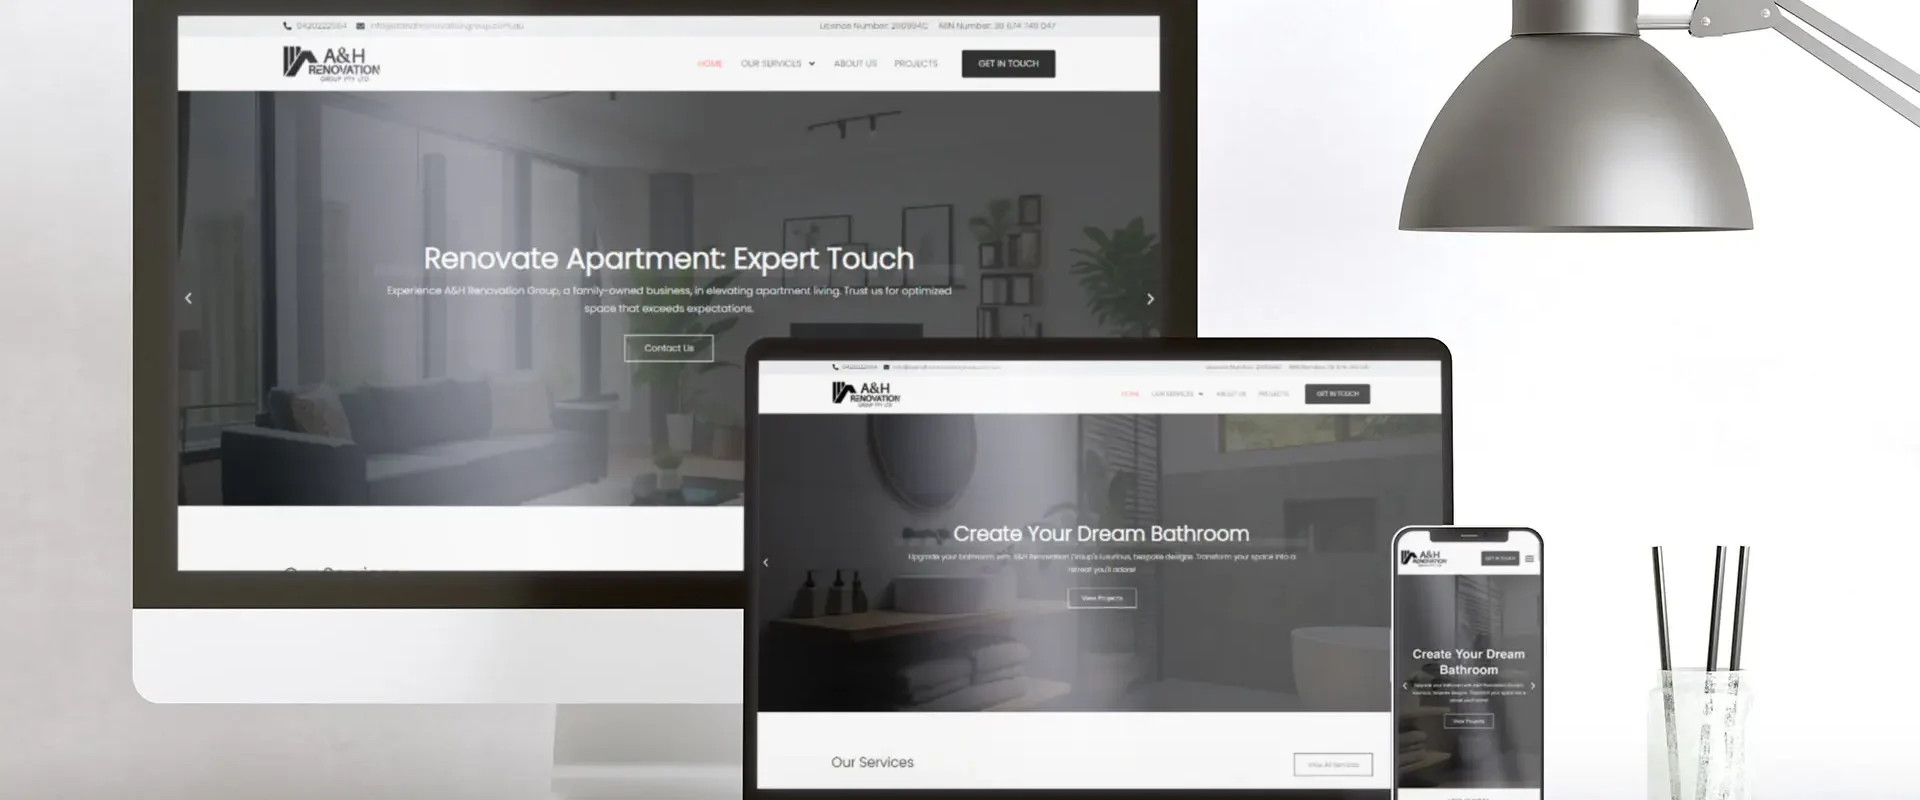 A mockup of a renovation company website development, featuring a clean and modern interface with before-and-after images of home renovations, services offered, and contact information.